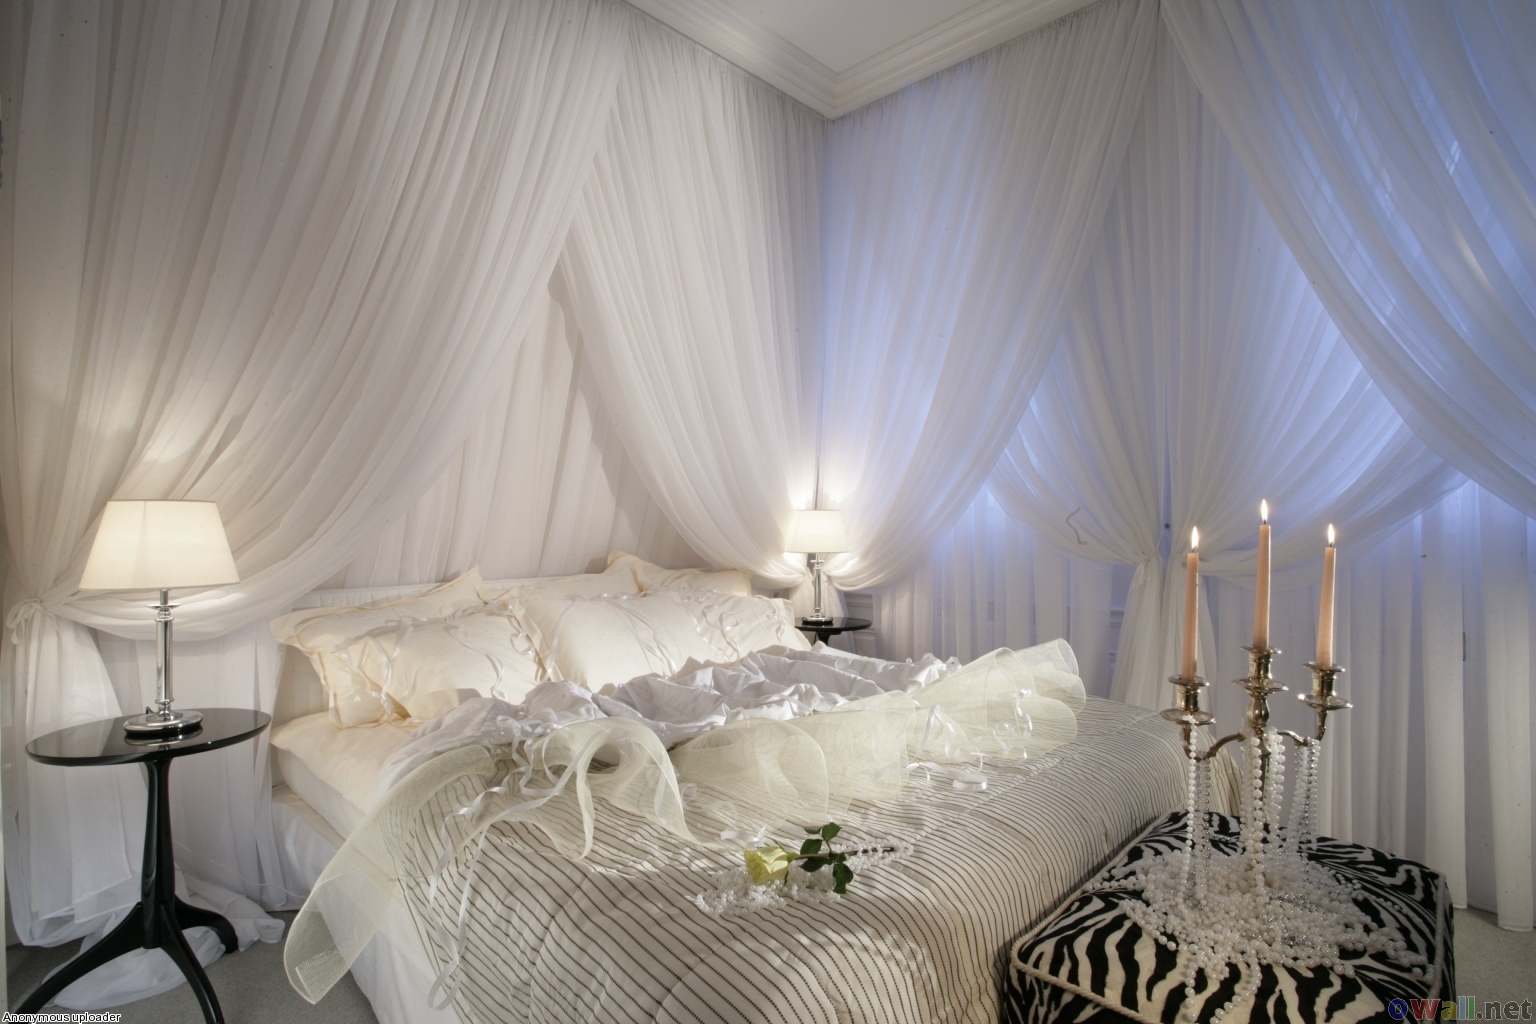 Decorating A Bedroom With A White Comforter